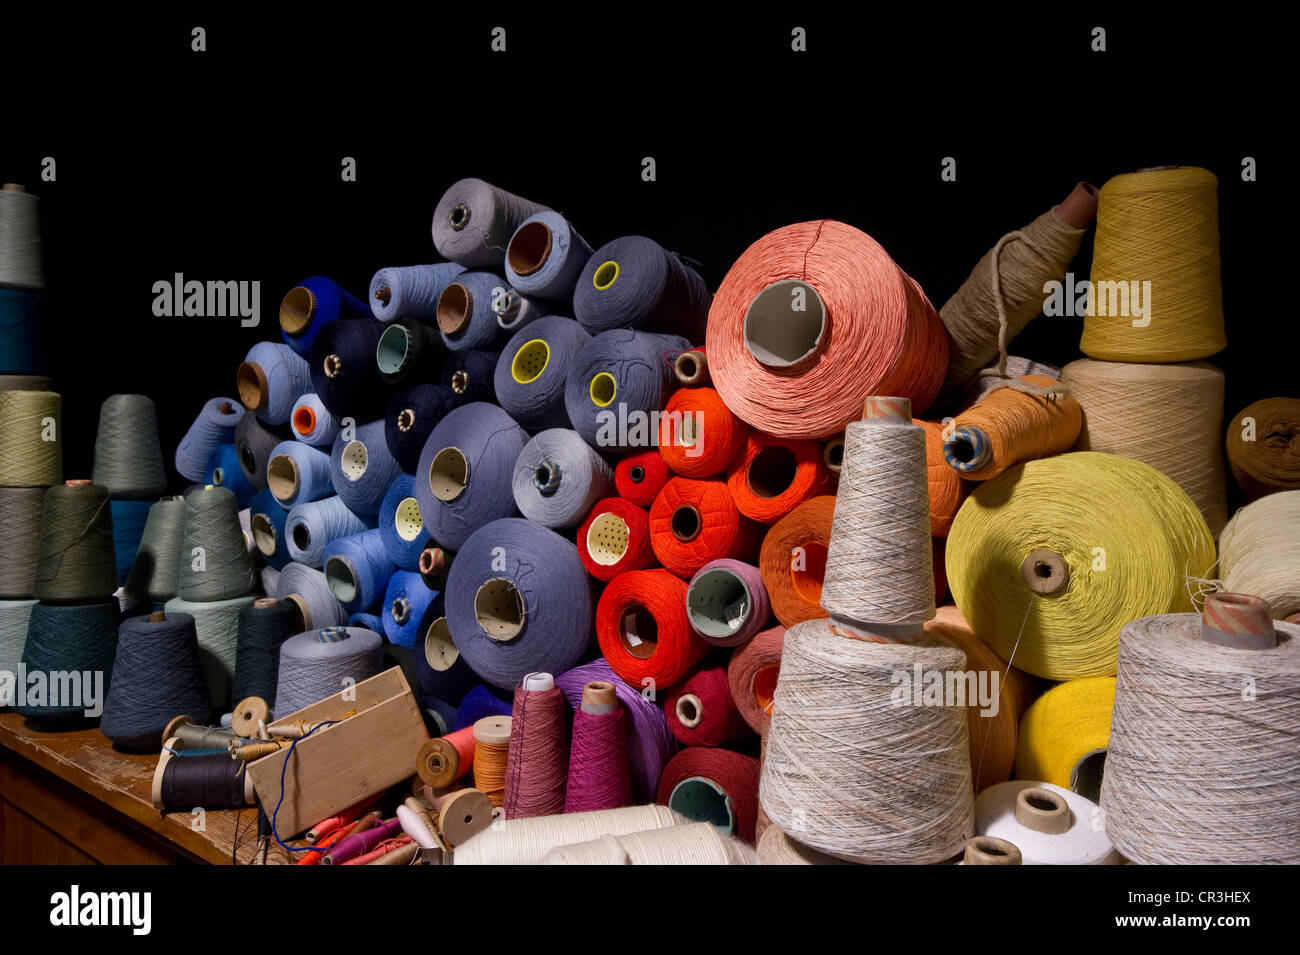 Spools and spindles Stock Photo